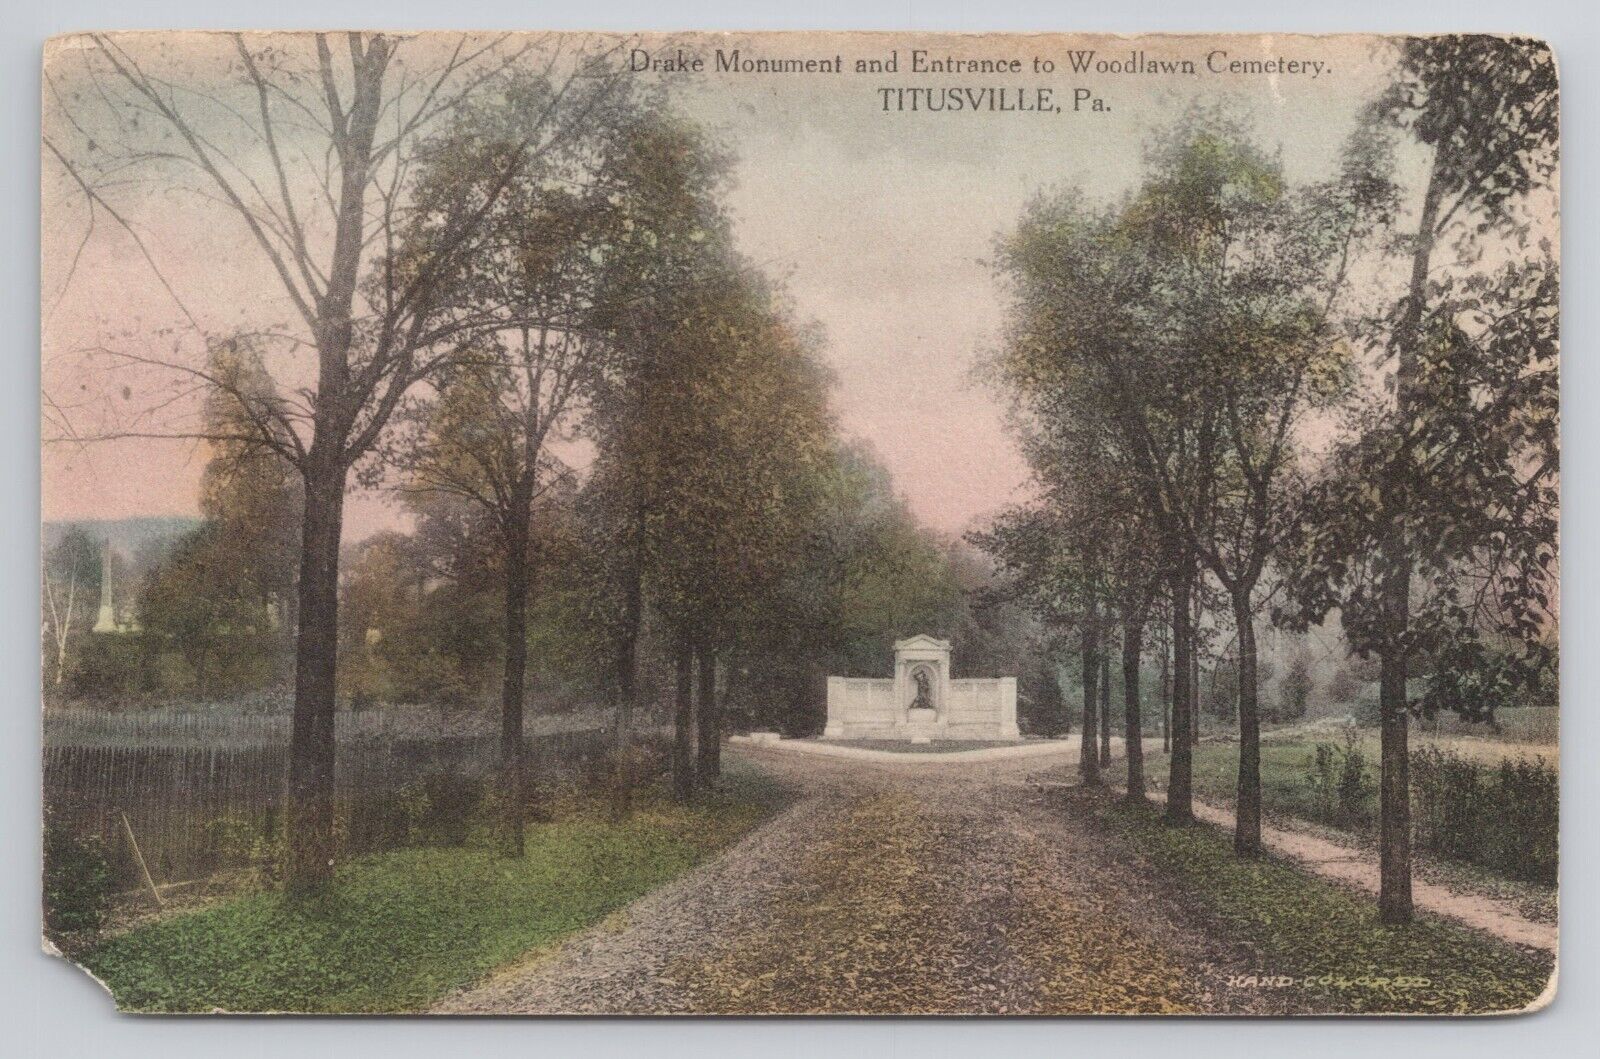 Drake Monument And Entrance to Woodlawn Cemetery PA 1910 Antique Postcard